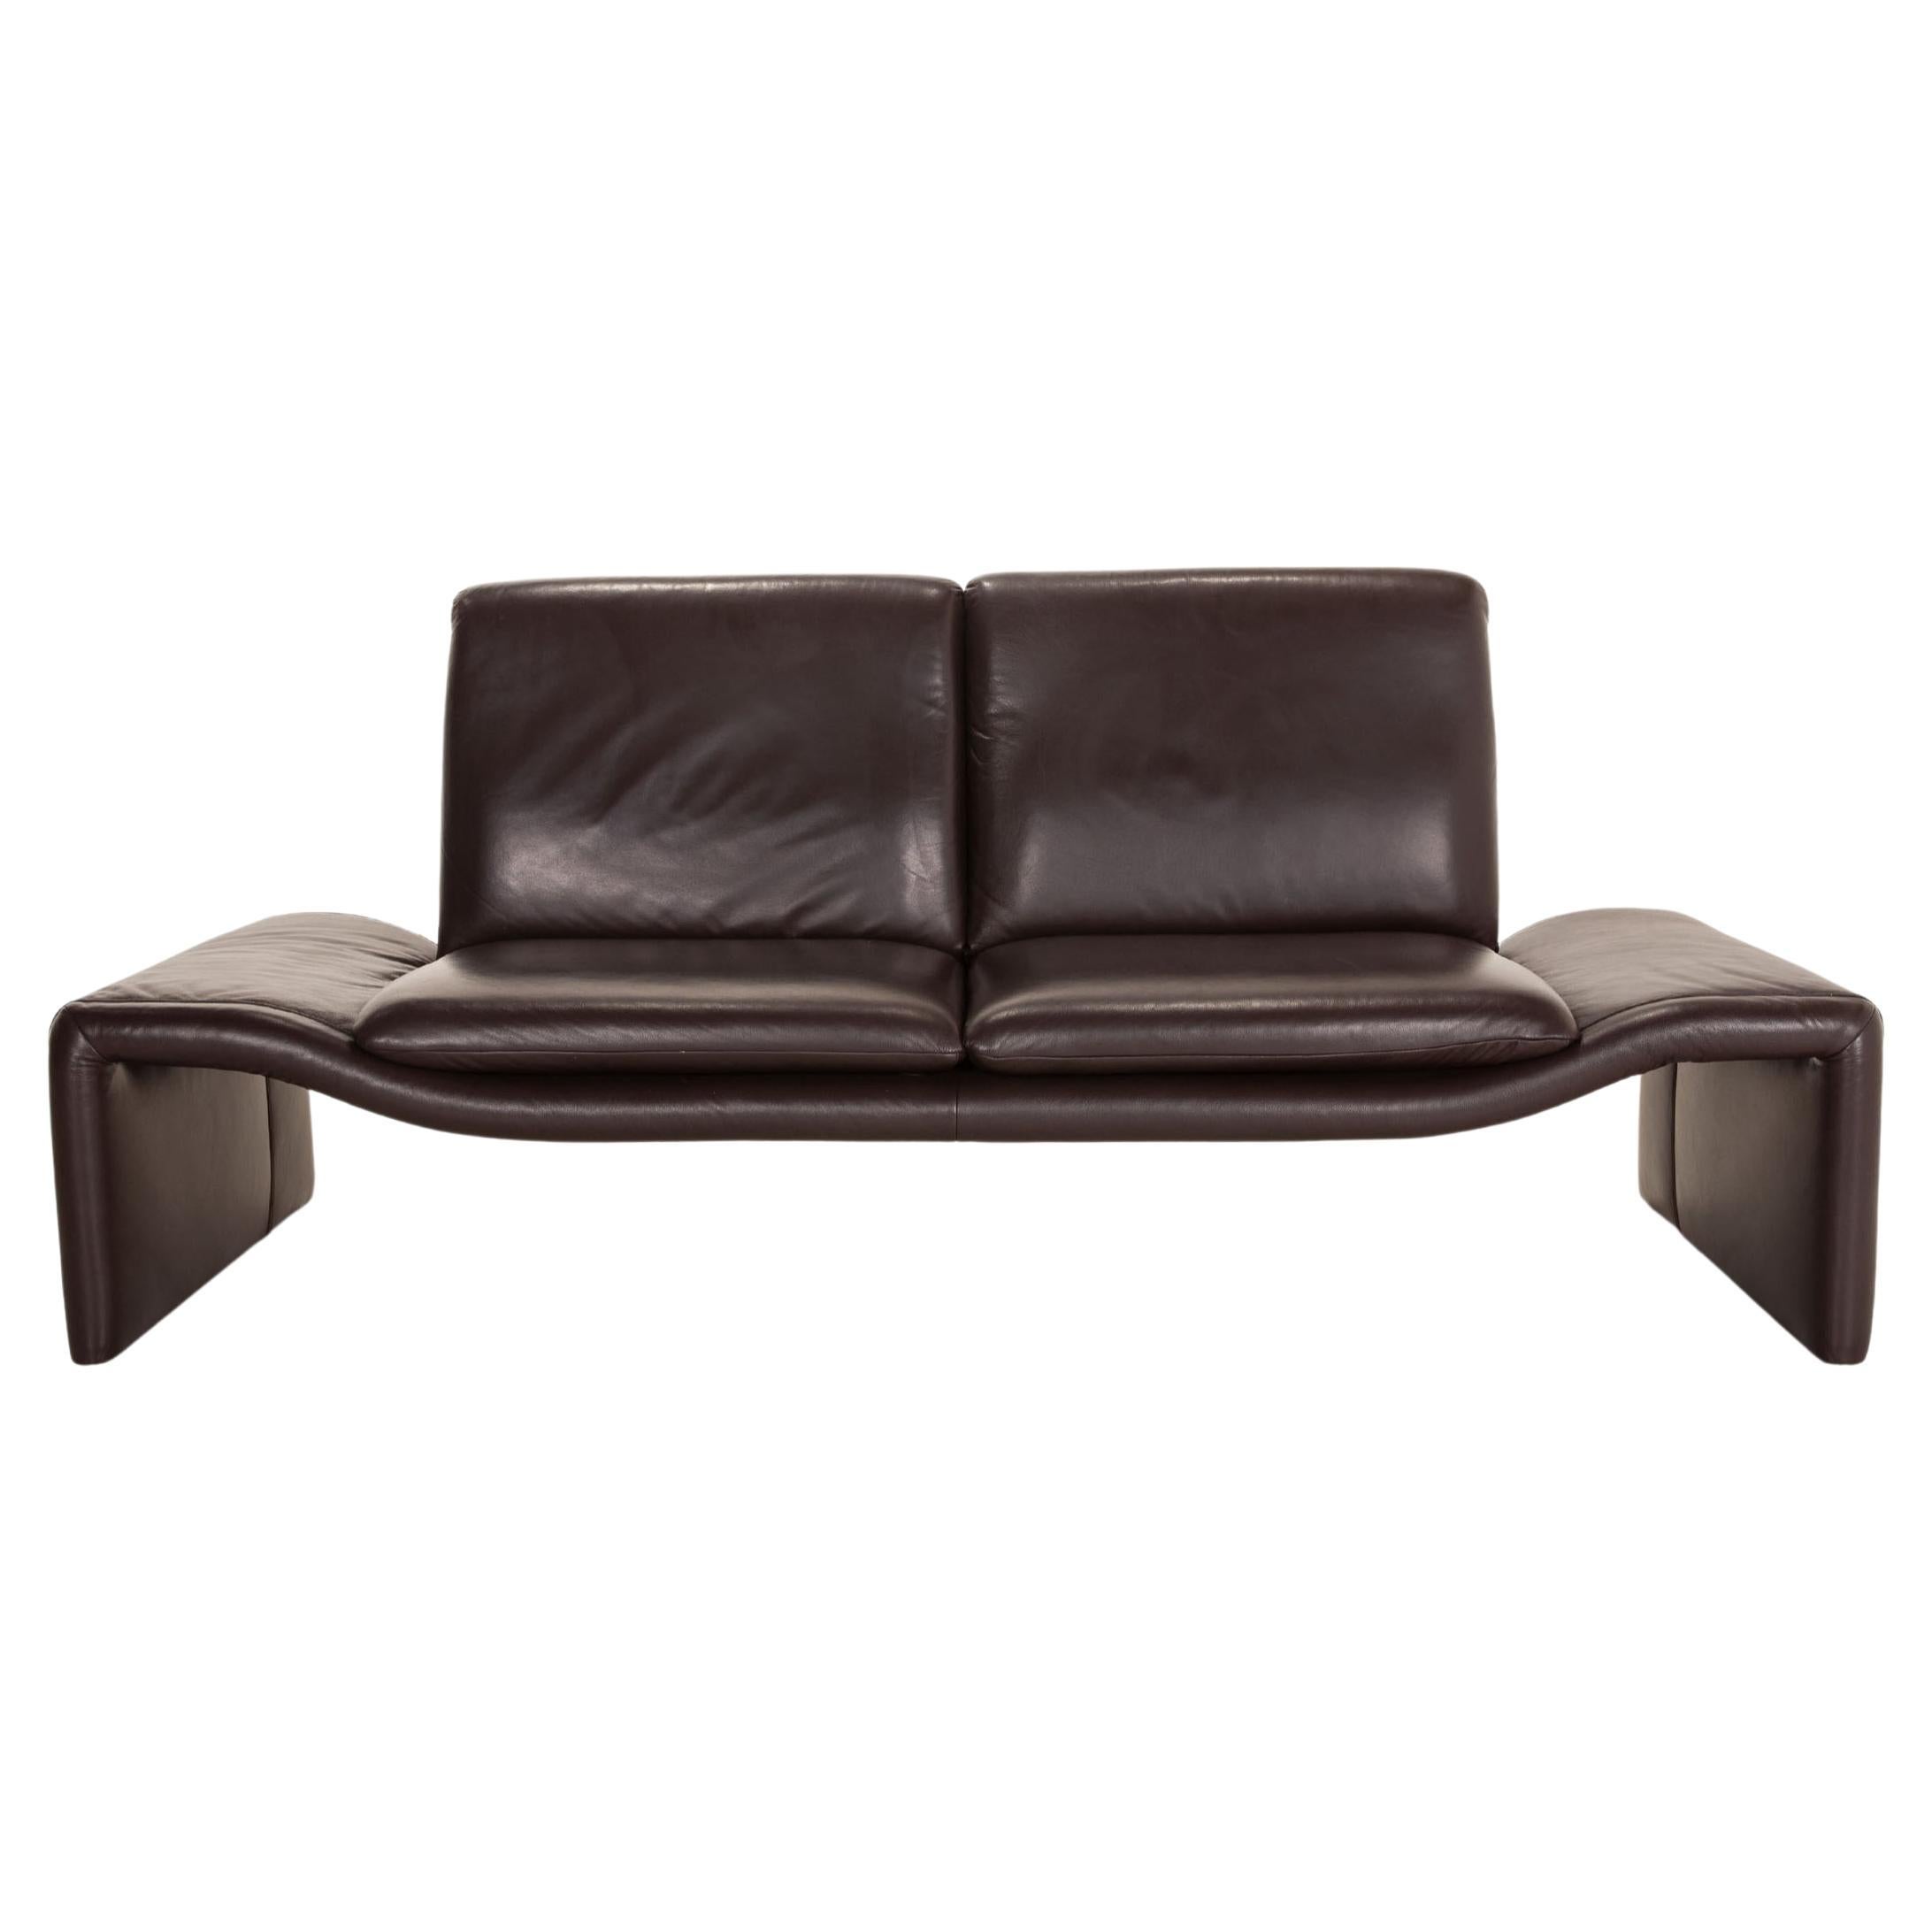 Koinor Fellini Leather Sofa Brown Two Seater Couch